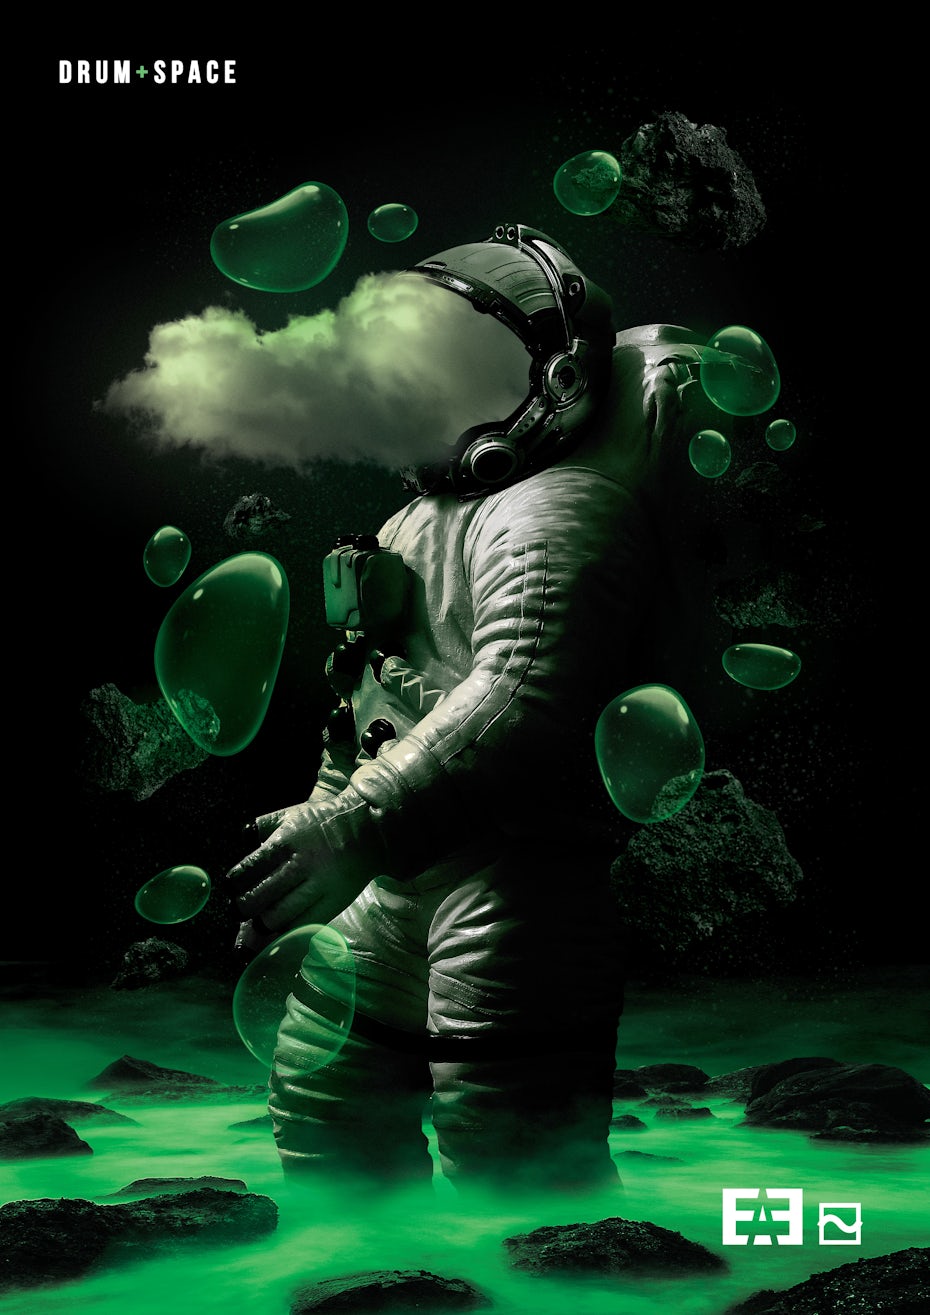 Poster design showing an astronaut full of smoke